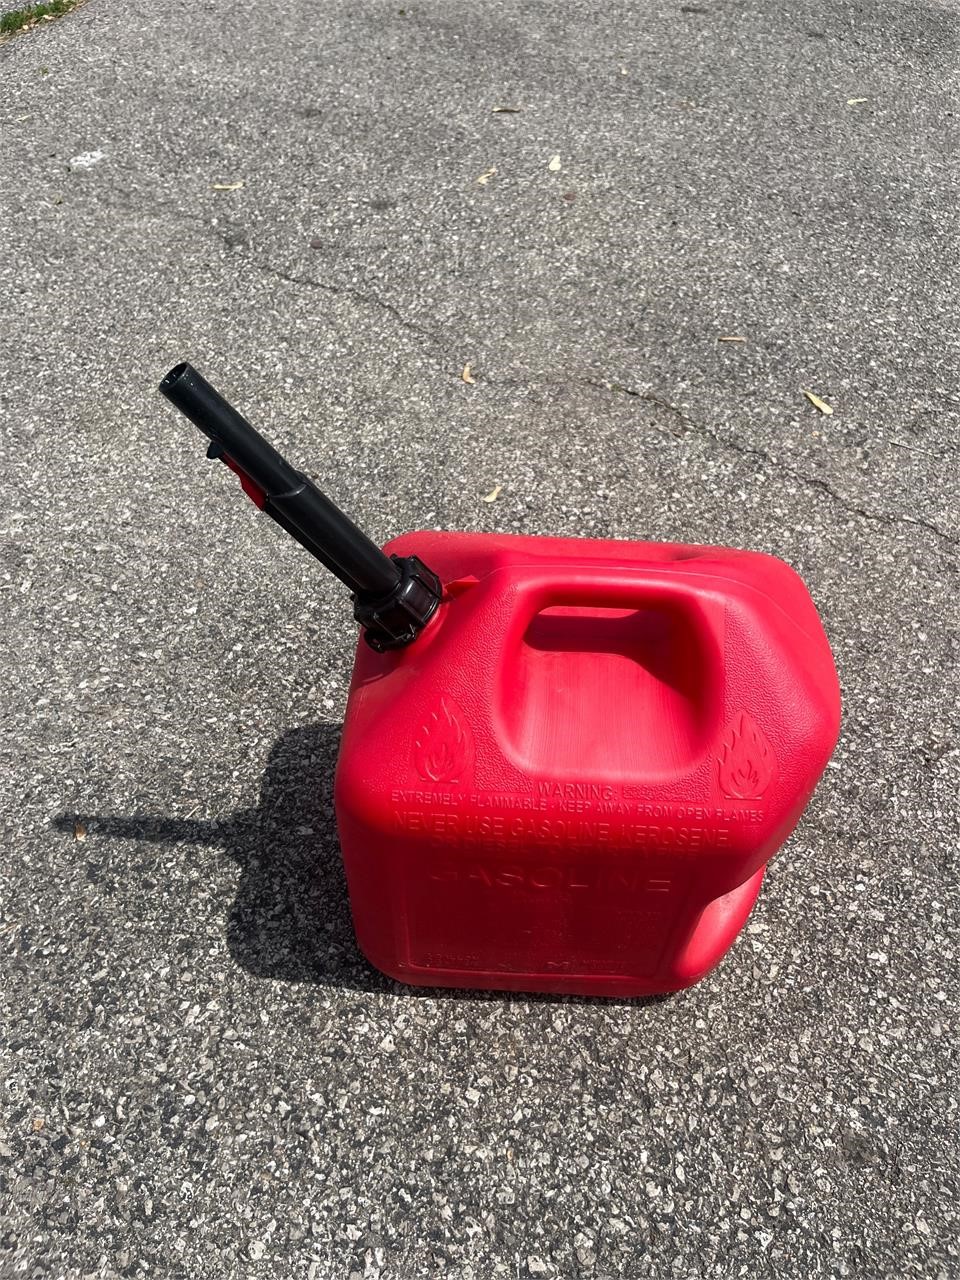 Red Plastic Gasoline Can